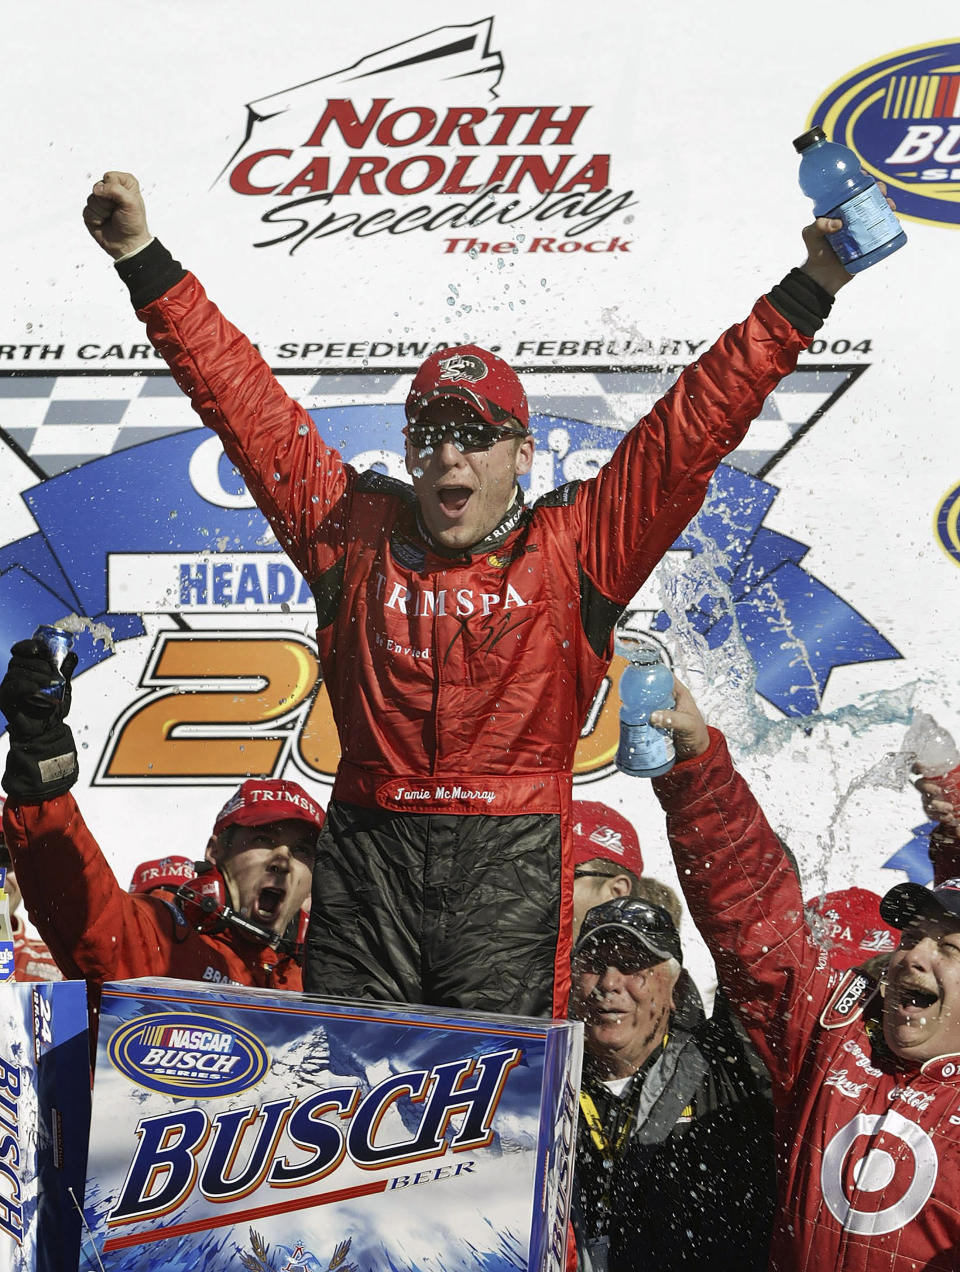 FILE - Jamie McMurray celebrates with his crew in Victory Lane after winning the NASCAR Busch Series auto race at North Carolina Speedway near Rockingham, N.C., Feb. 21, 2004. Rockingham is a rural track that lost its place on the NASCAR schedule as the sport gravitated toward larger and more profitable markets. (AP Photo/Chuck Burton, File)